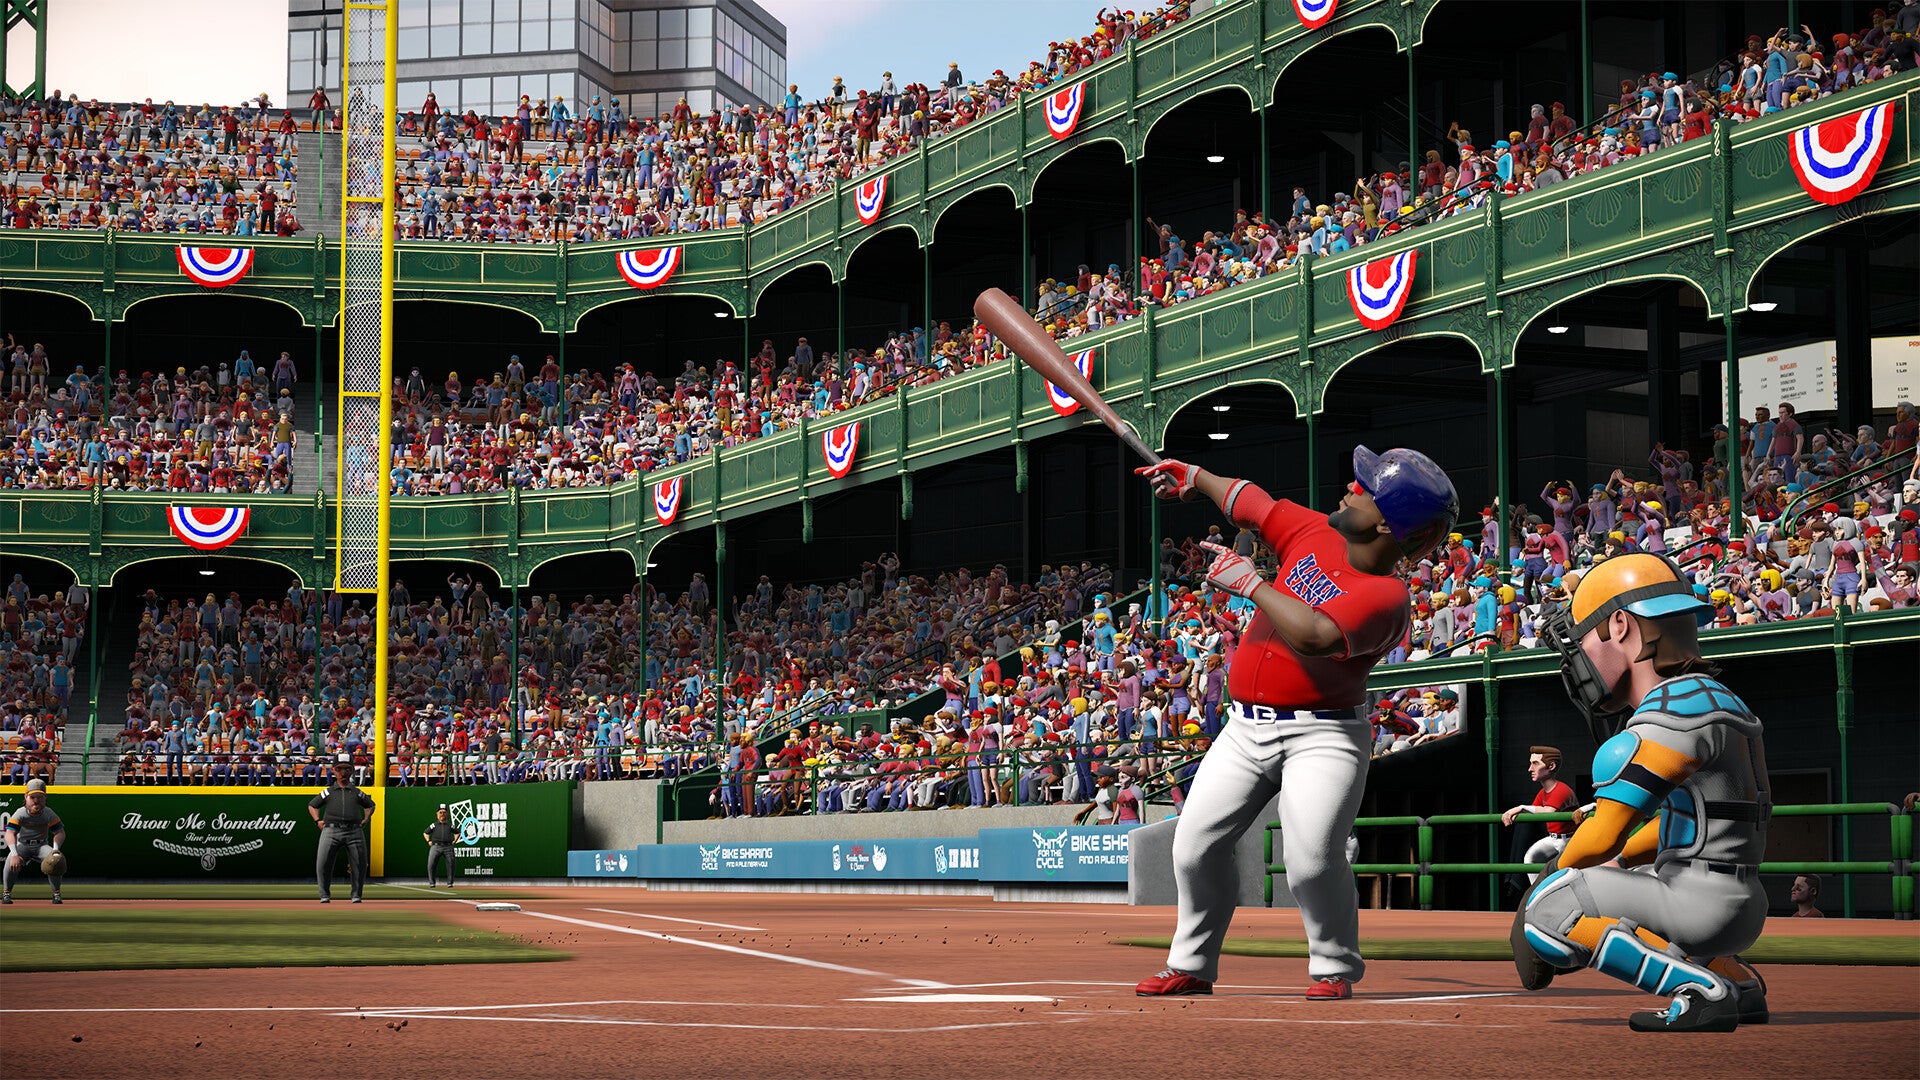 Super Mega Baseball 4 will launch this summer with a roster of former pros Rock Paper Shotgun